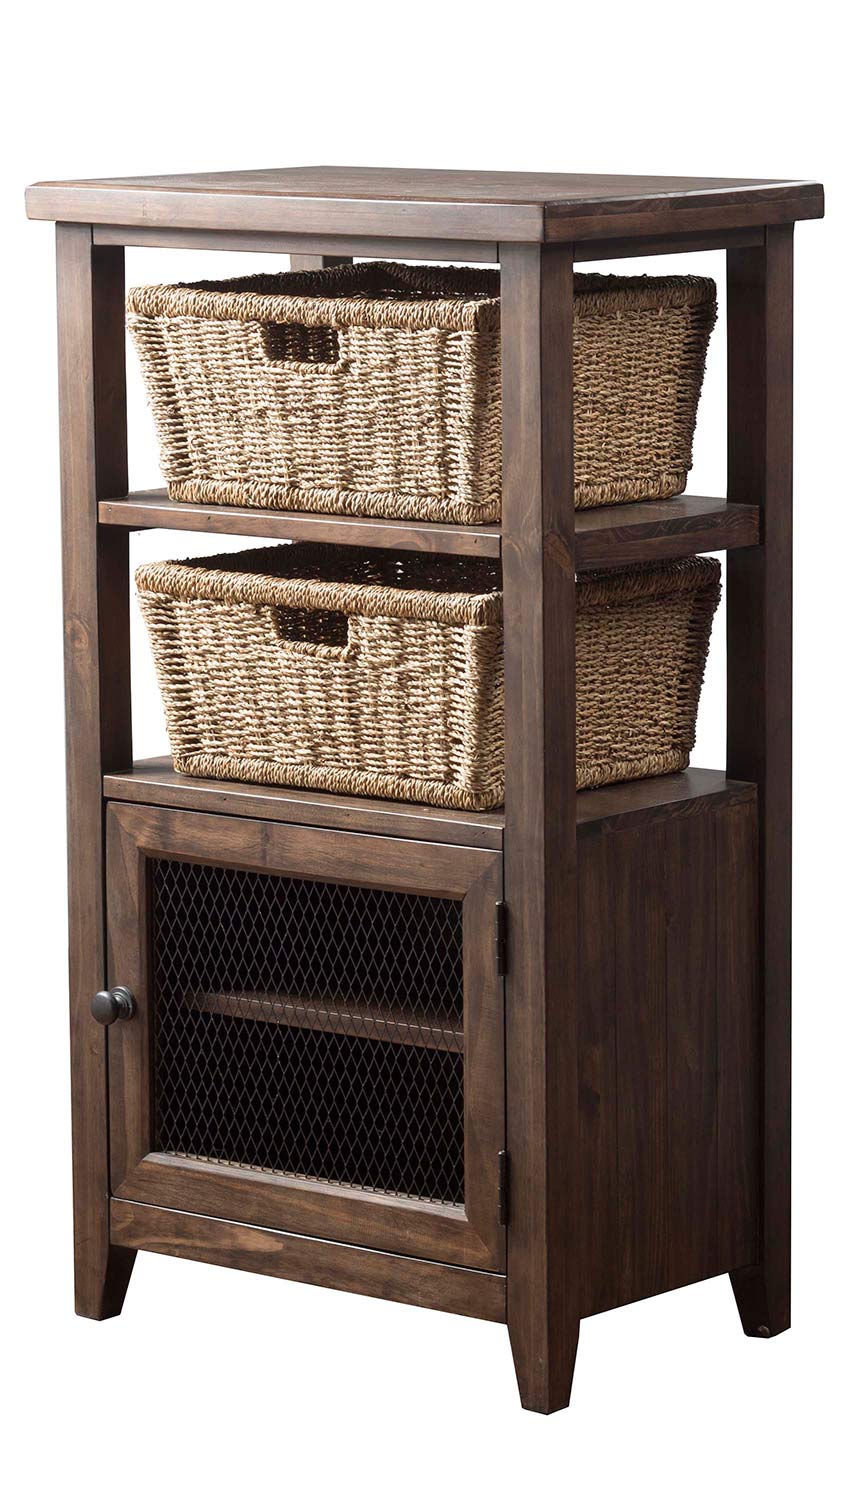 Hillsdale Tuscan Retreat Basket Stand with and 2-Baskets - Mocha